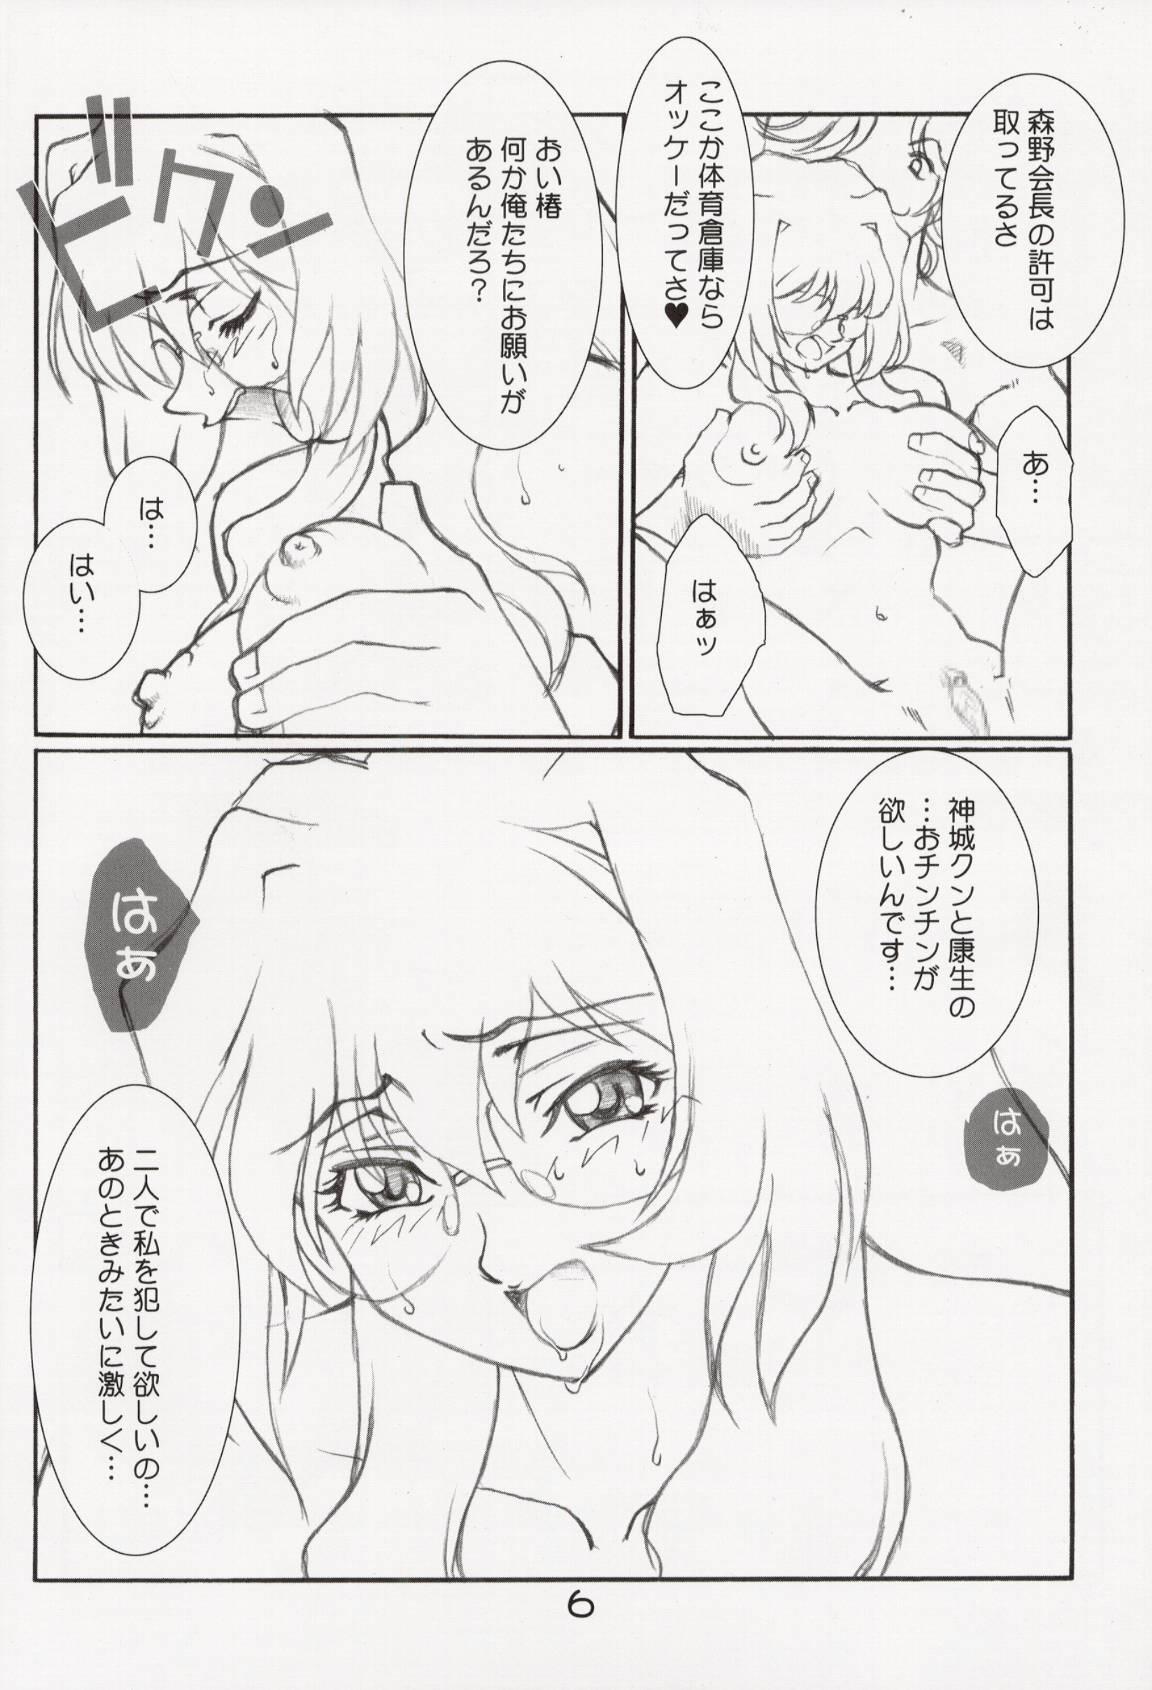 She Sudden Onegai Twins SYNDROME - Onegai twins Passivo - Page 7